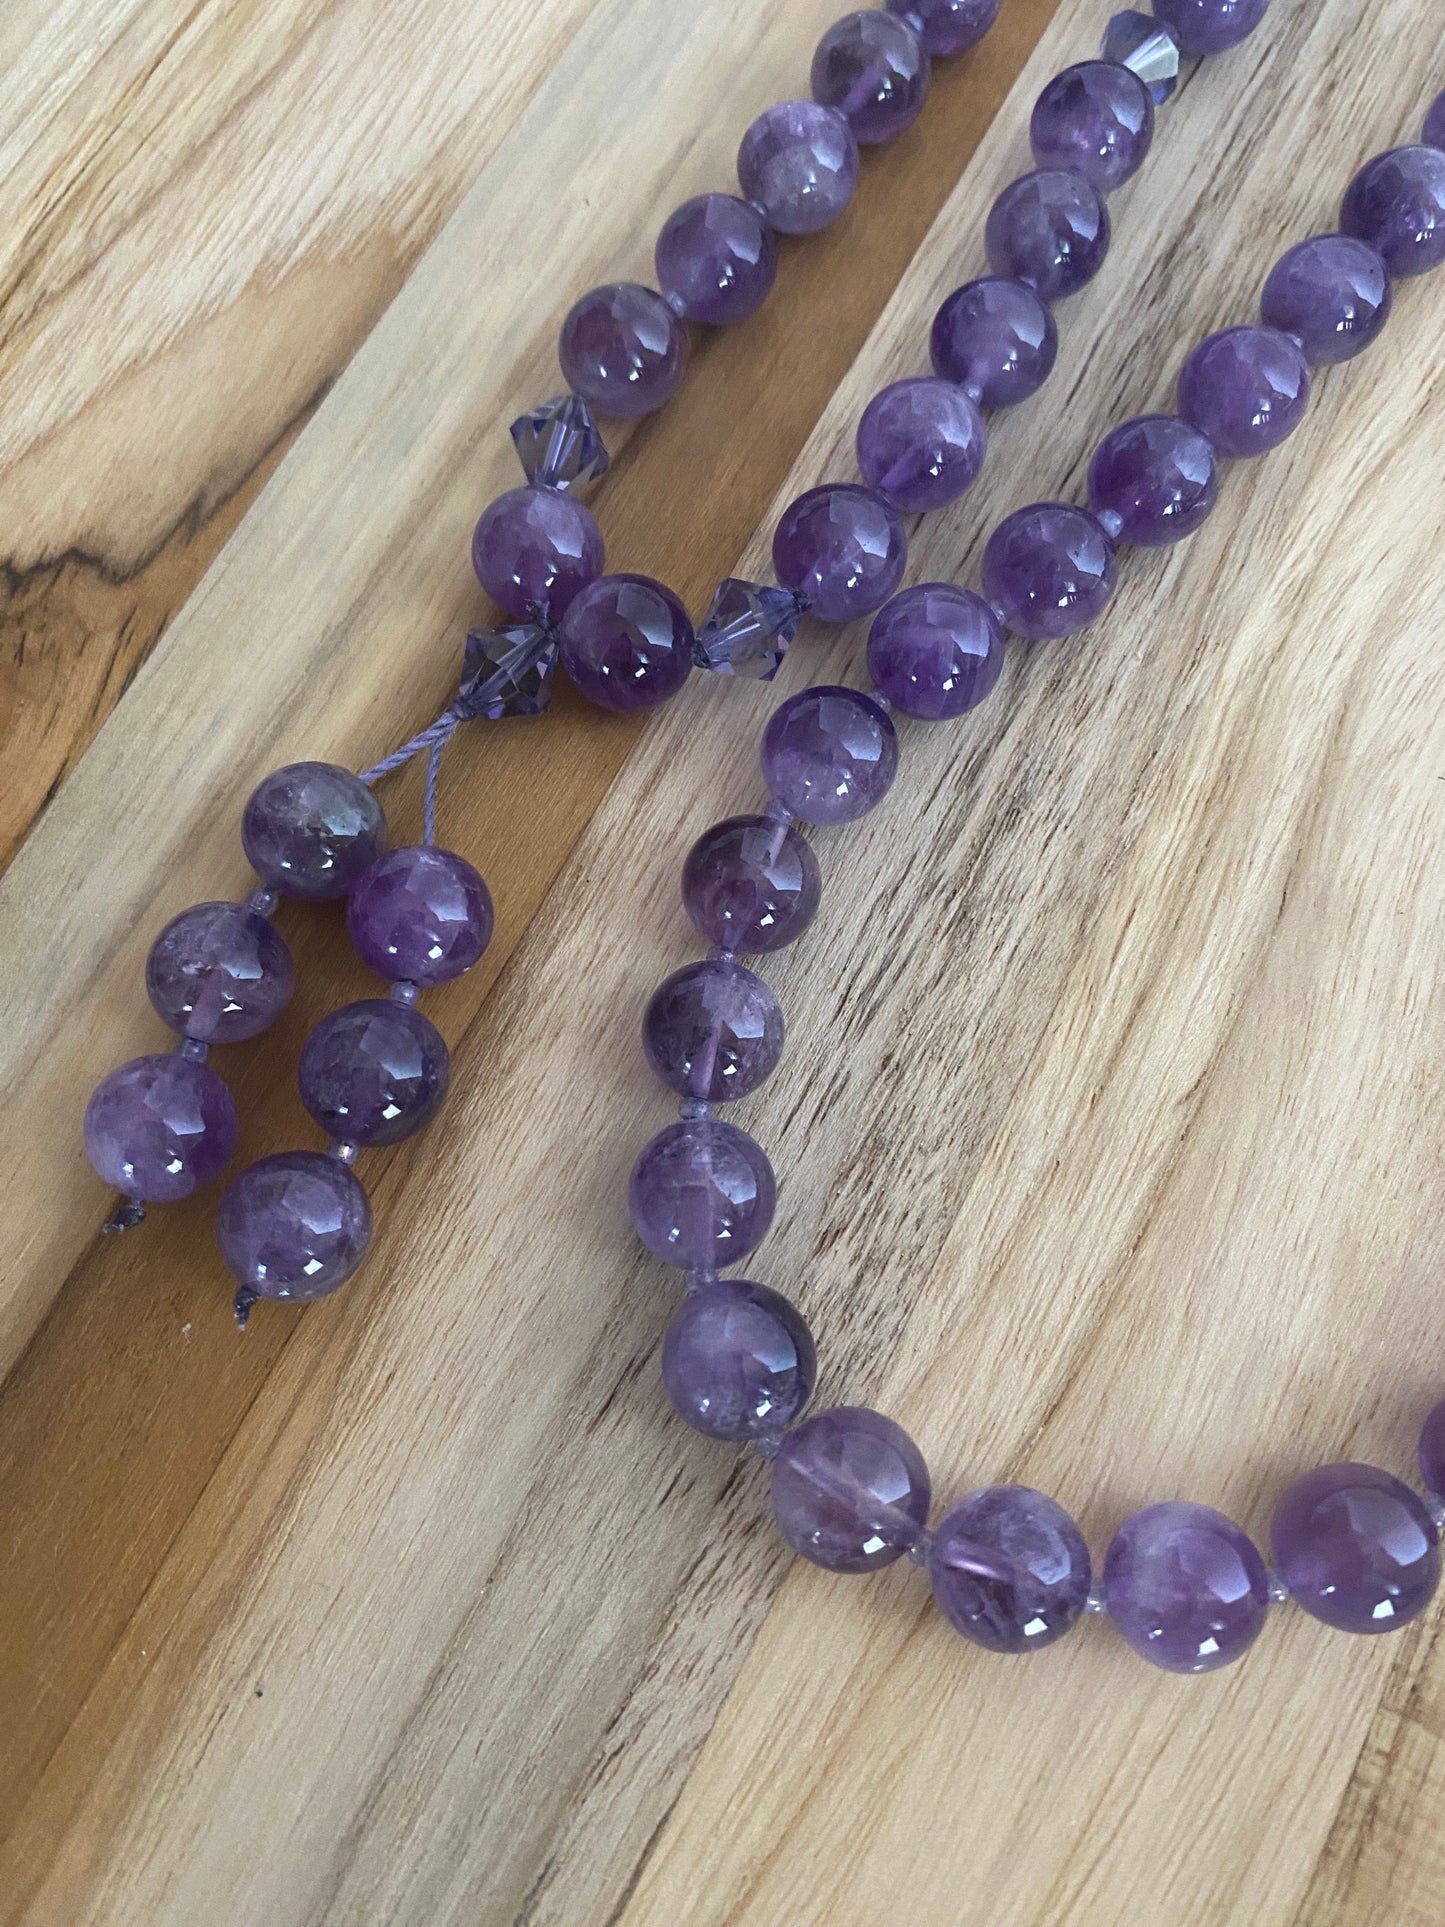 30" Long Amethyst and Crystal Beaded Necklace